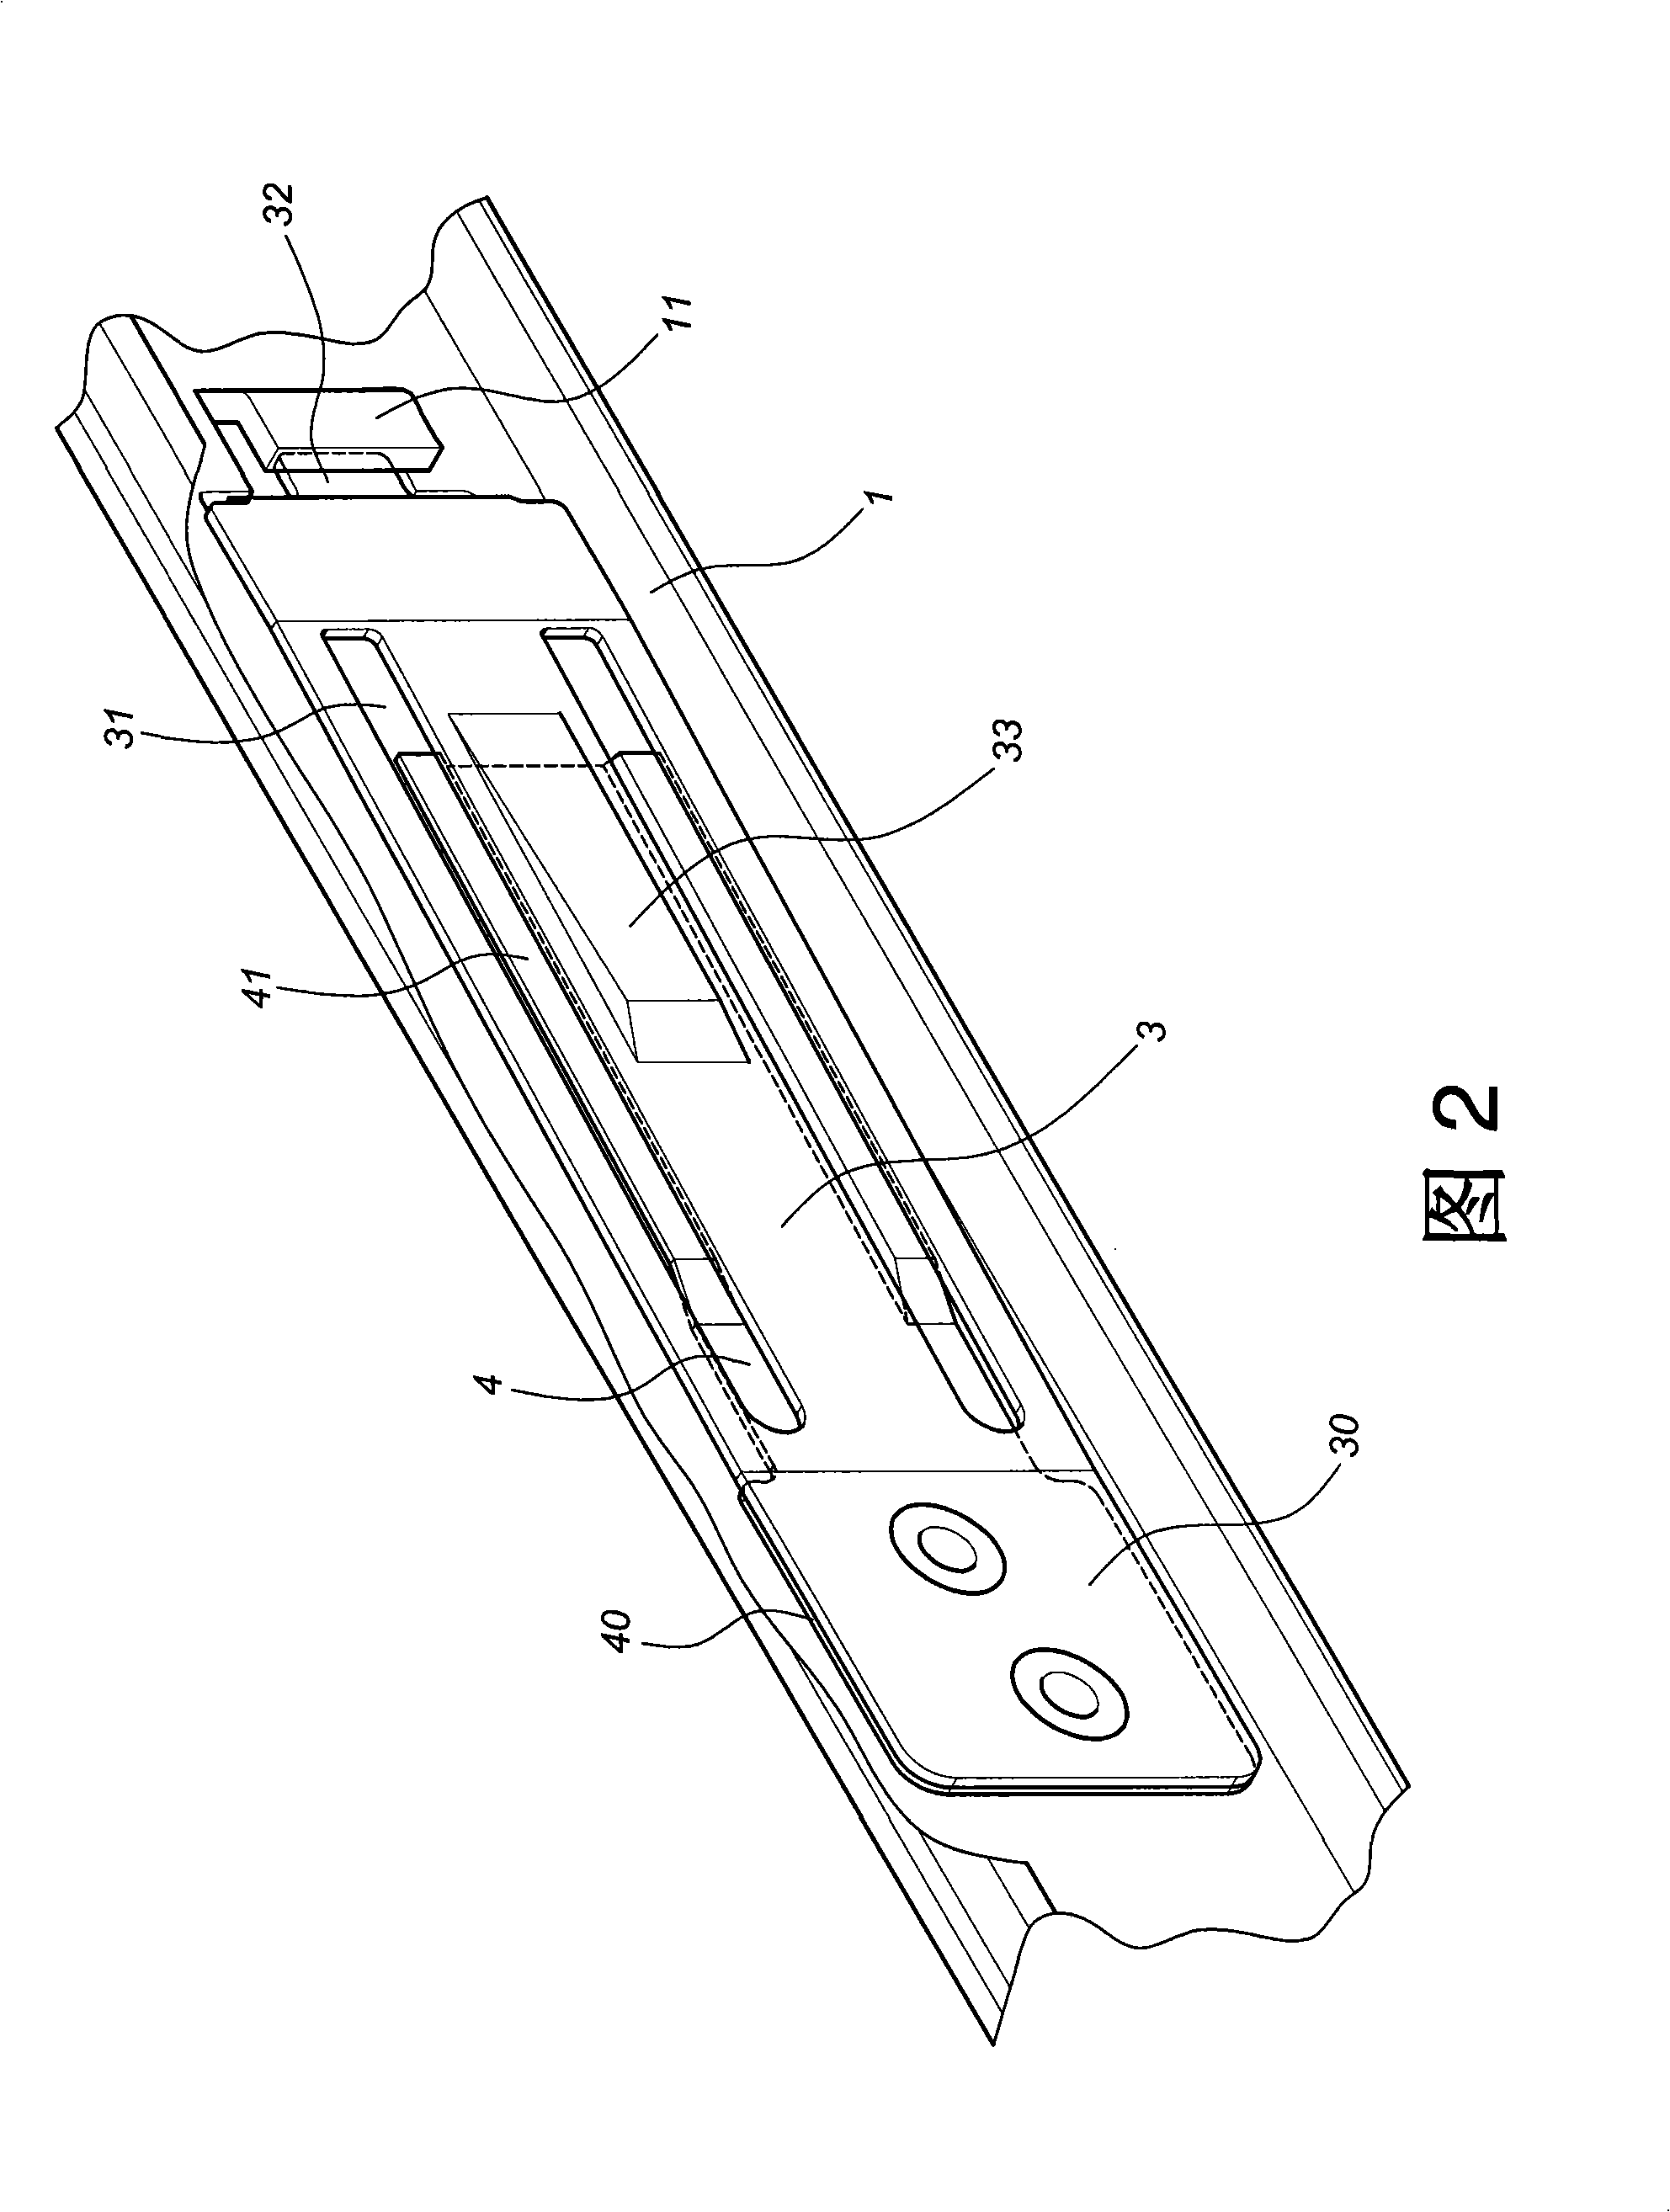 Sliding track stretching and positioning apparatus